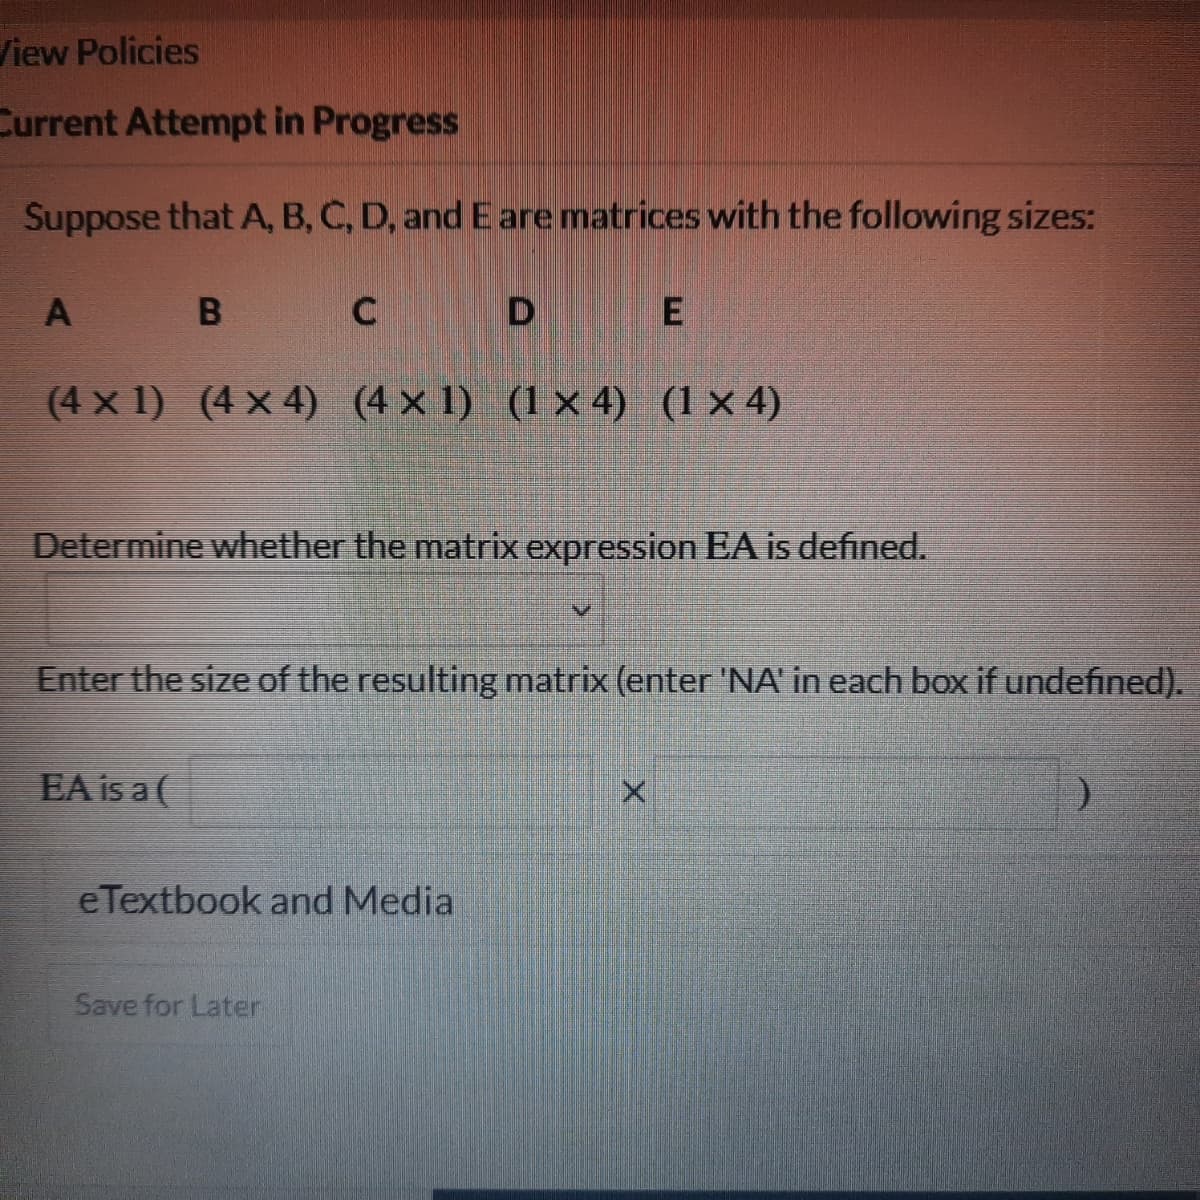 View Policies
Current Attempt in Progress
Suppose that A, B, C, D, and E are matrices with the following sizes:
A
B
D
B
C
DE
(4 × 1) (4 × 4) (4 × 1) (1 × 4) (1 × 4)
Determine whether the matrix expression EA is defined.
Enter the size of the resulting matrix (enter 'NA' in each box if undefined).
EA is a (
X
eTextbook and Media
Save for Later